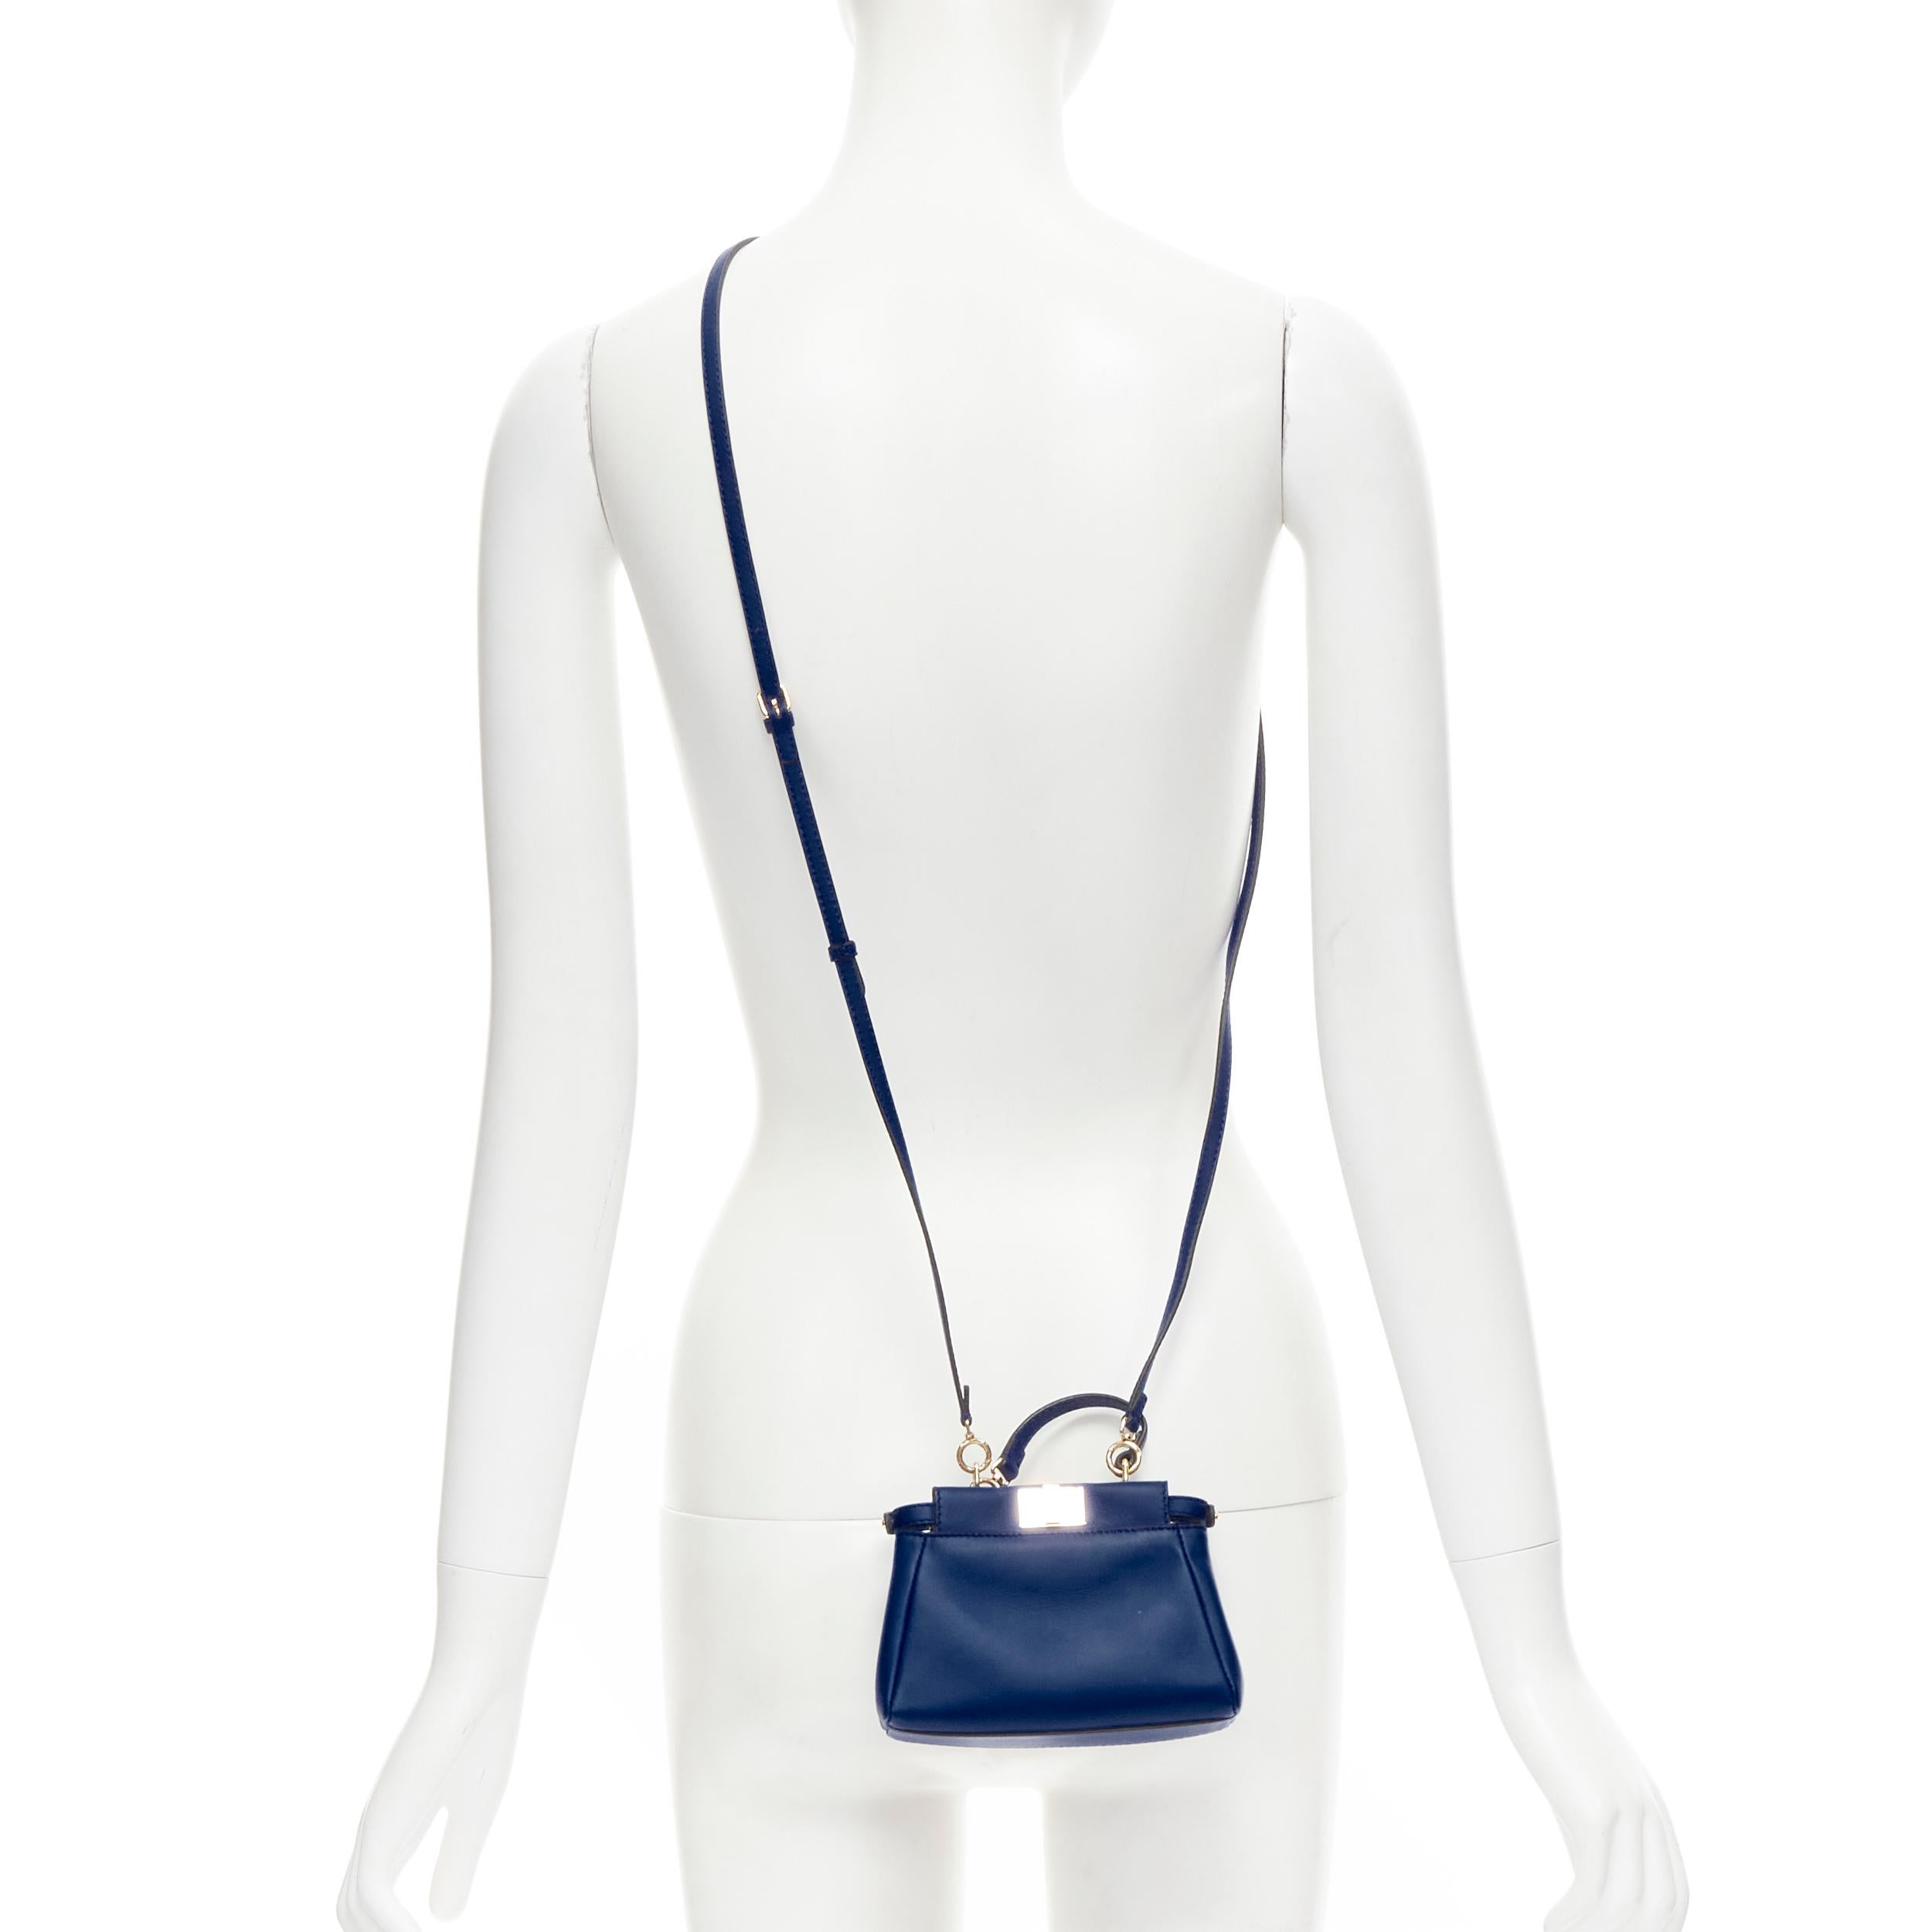 FENDI Micro Peekaboo blue leather gold hardware crossbody bag 
Reference: TACW/A00022 
Brand: Fendi 
Model: 8 M 0 3 5 5-K 4 7-1 5 8-5 1 7 7 
Material: Leather 
Color: Blue 
Pattern: Solid 
Closure: Turnlock 
Estimated Retail Price: US $1550